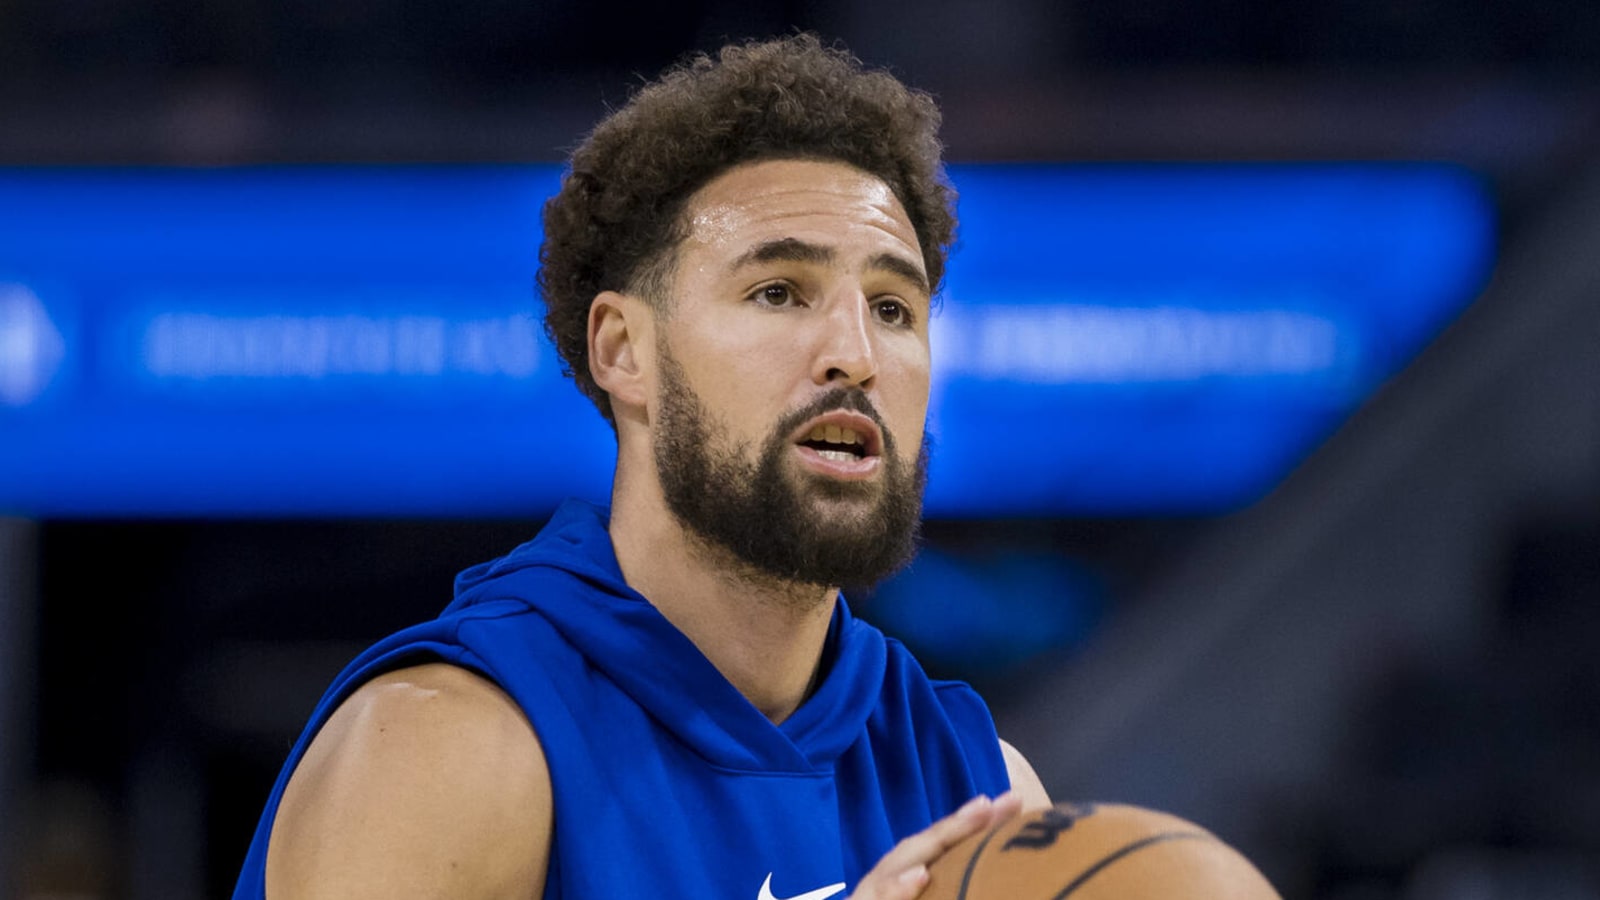 Klay Thompson tears into ESPN over their latest interview